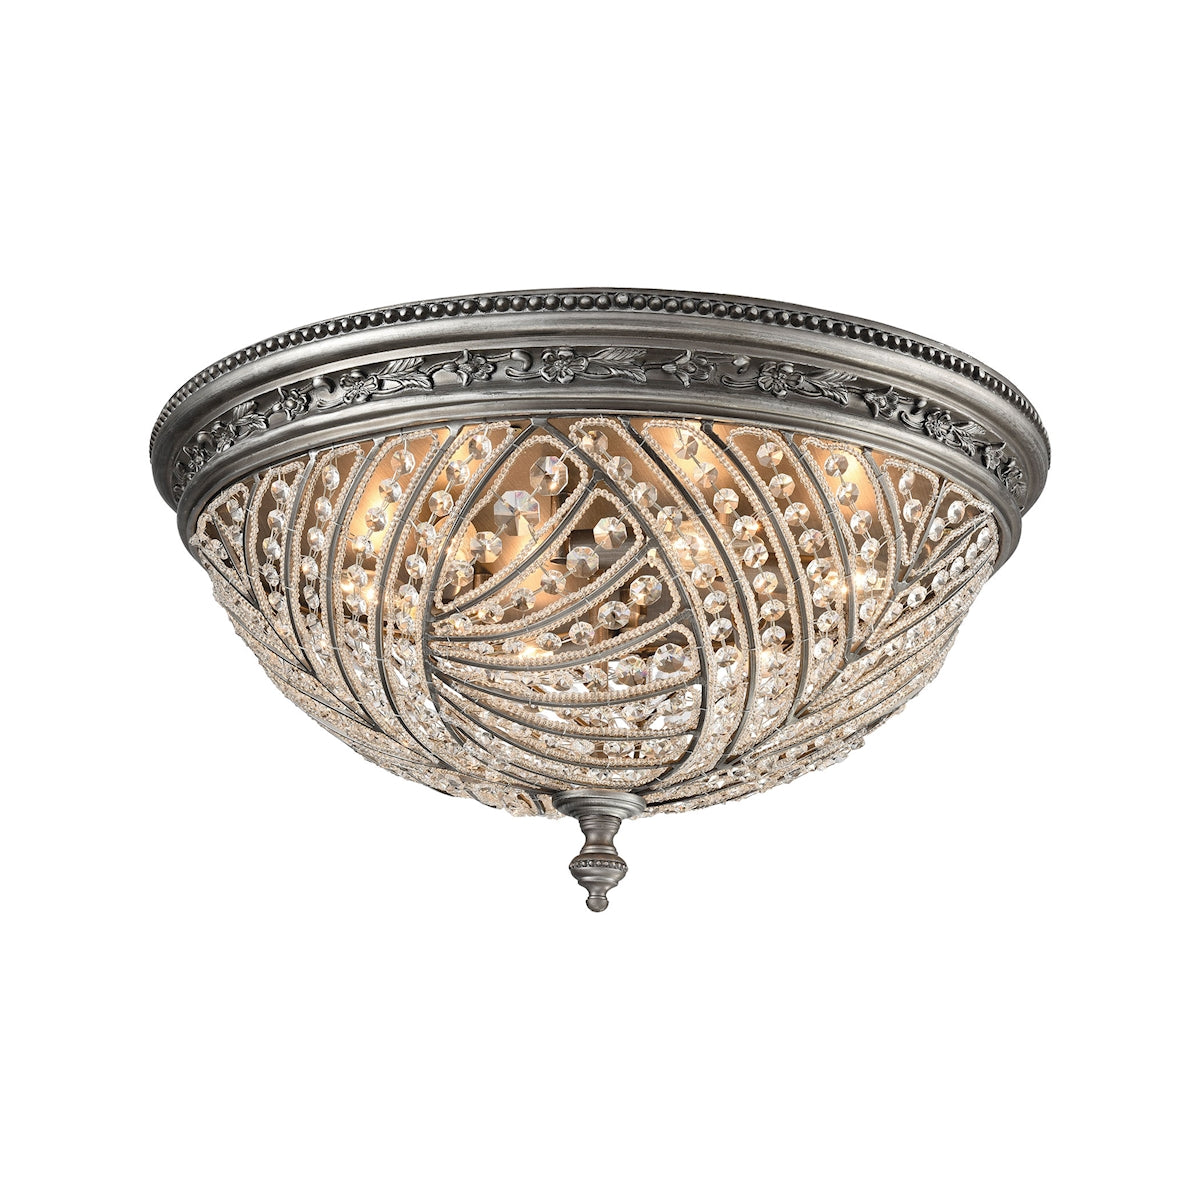 Renaissance 6-Light Flush Mount in Weathered Zinc with Crystal